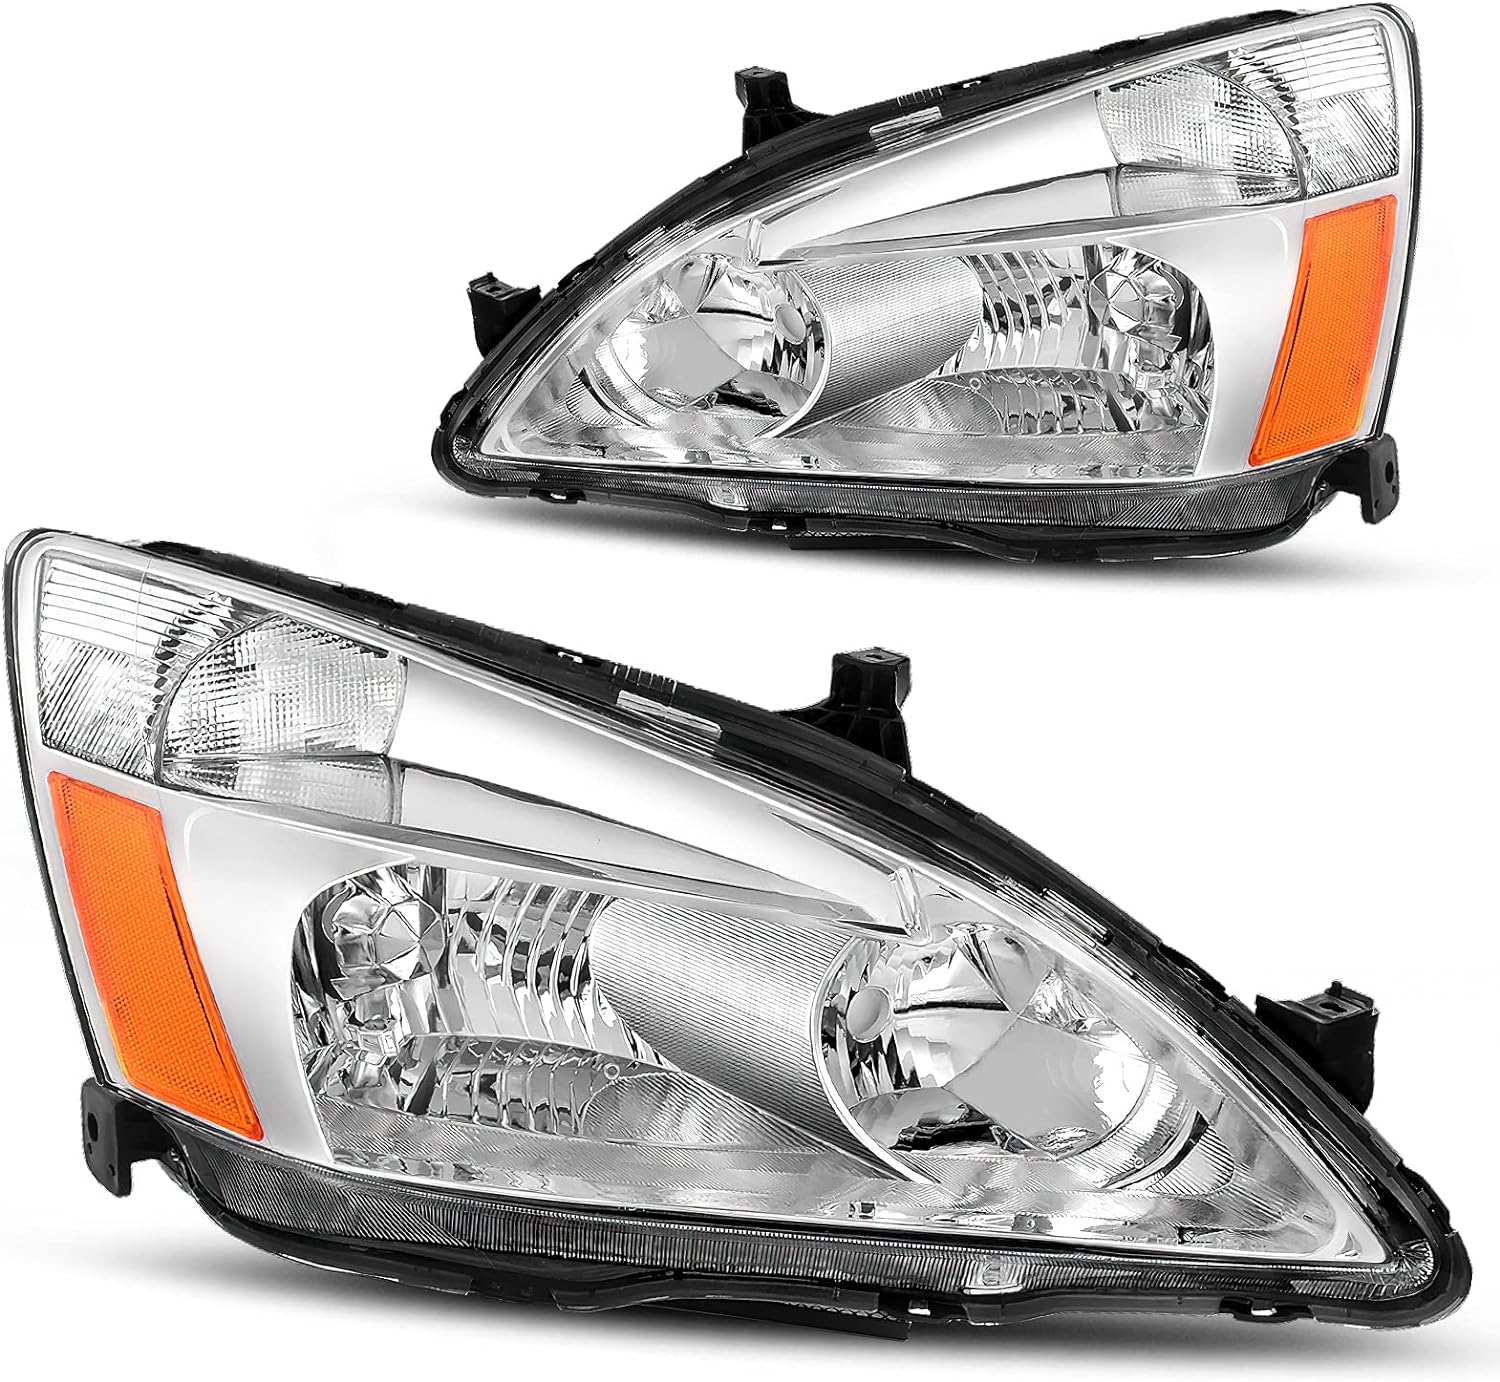 DWVO Headlight Assembly Compatible with 03-07 2003 2004 2005 2006 2007 Accord Replacement Headlamps Chrome Housing Clear Lens